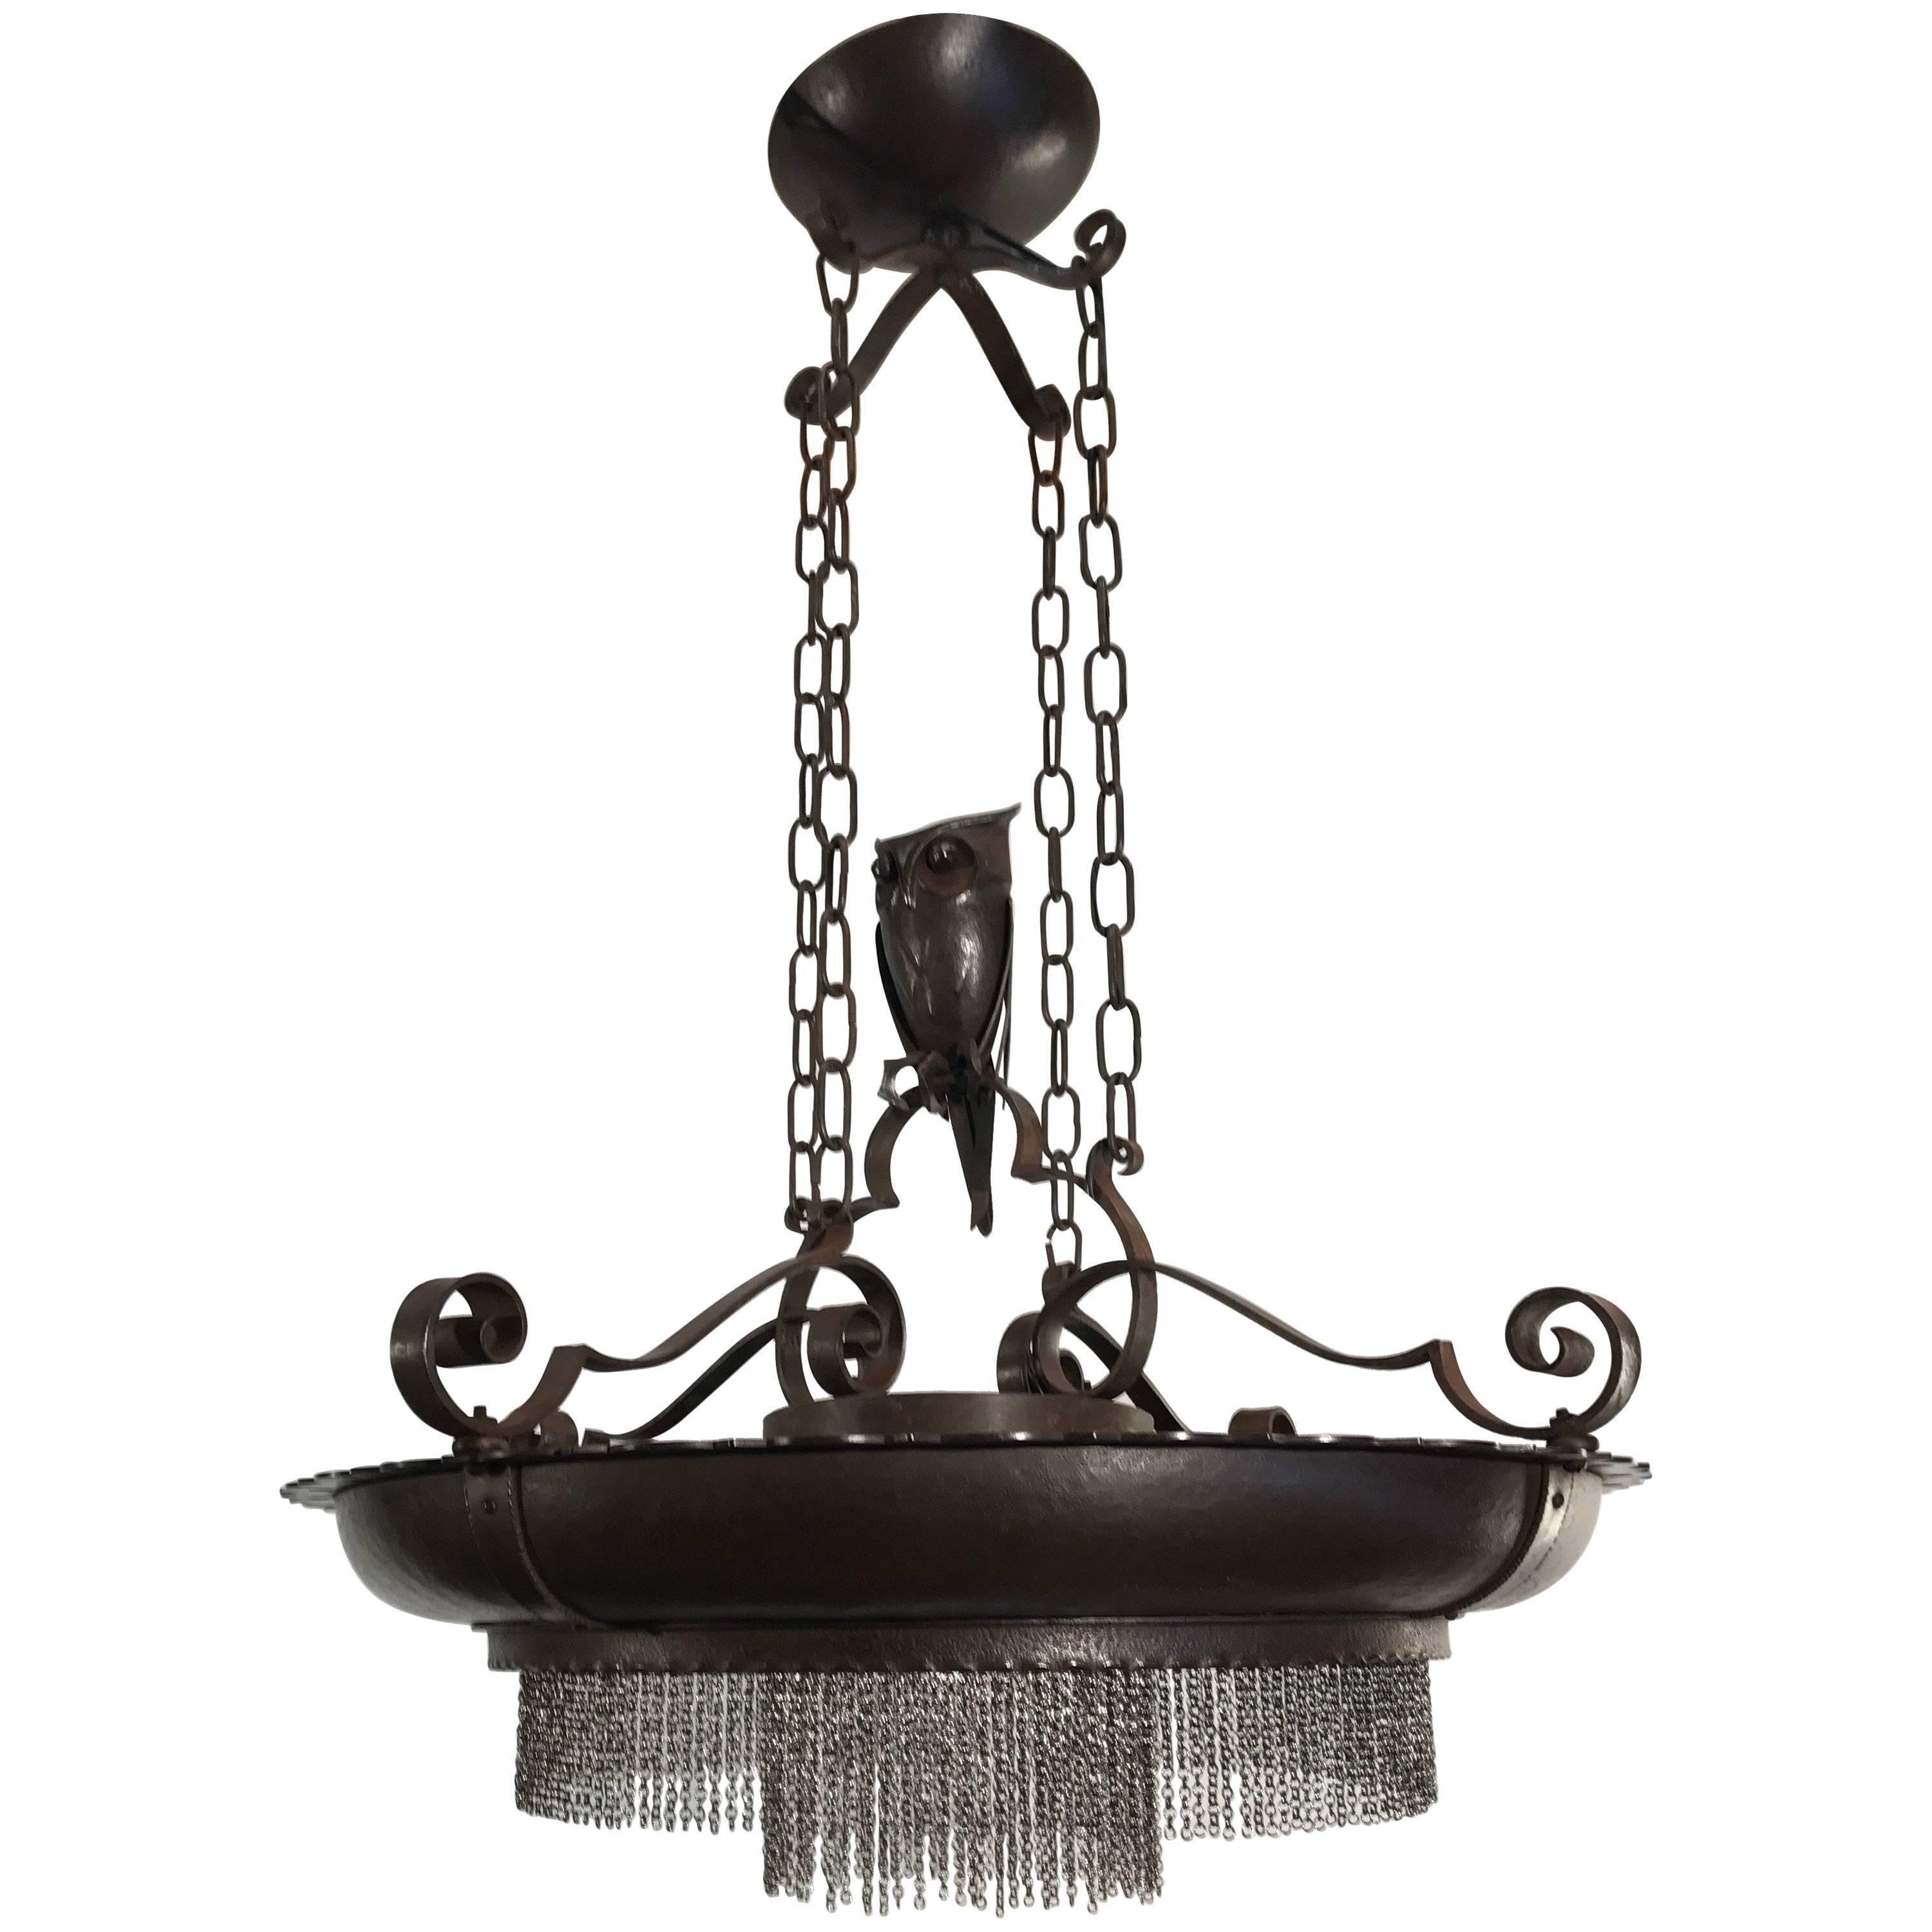 Amazing Arts and Crafts Wrought Iron Chandelier with Owl Sculpture, early 1900s